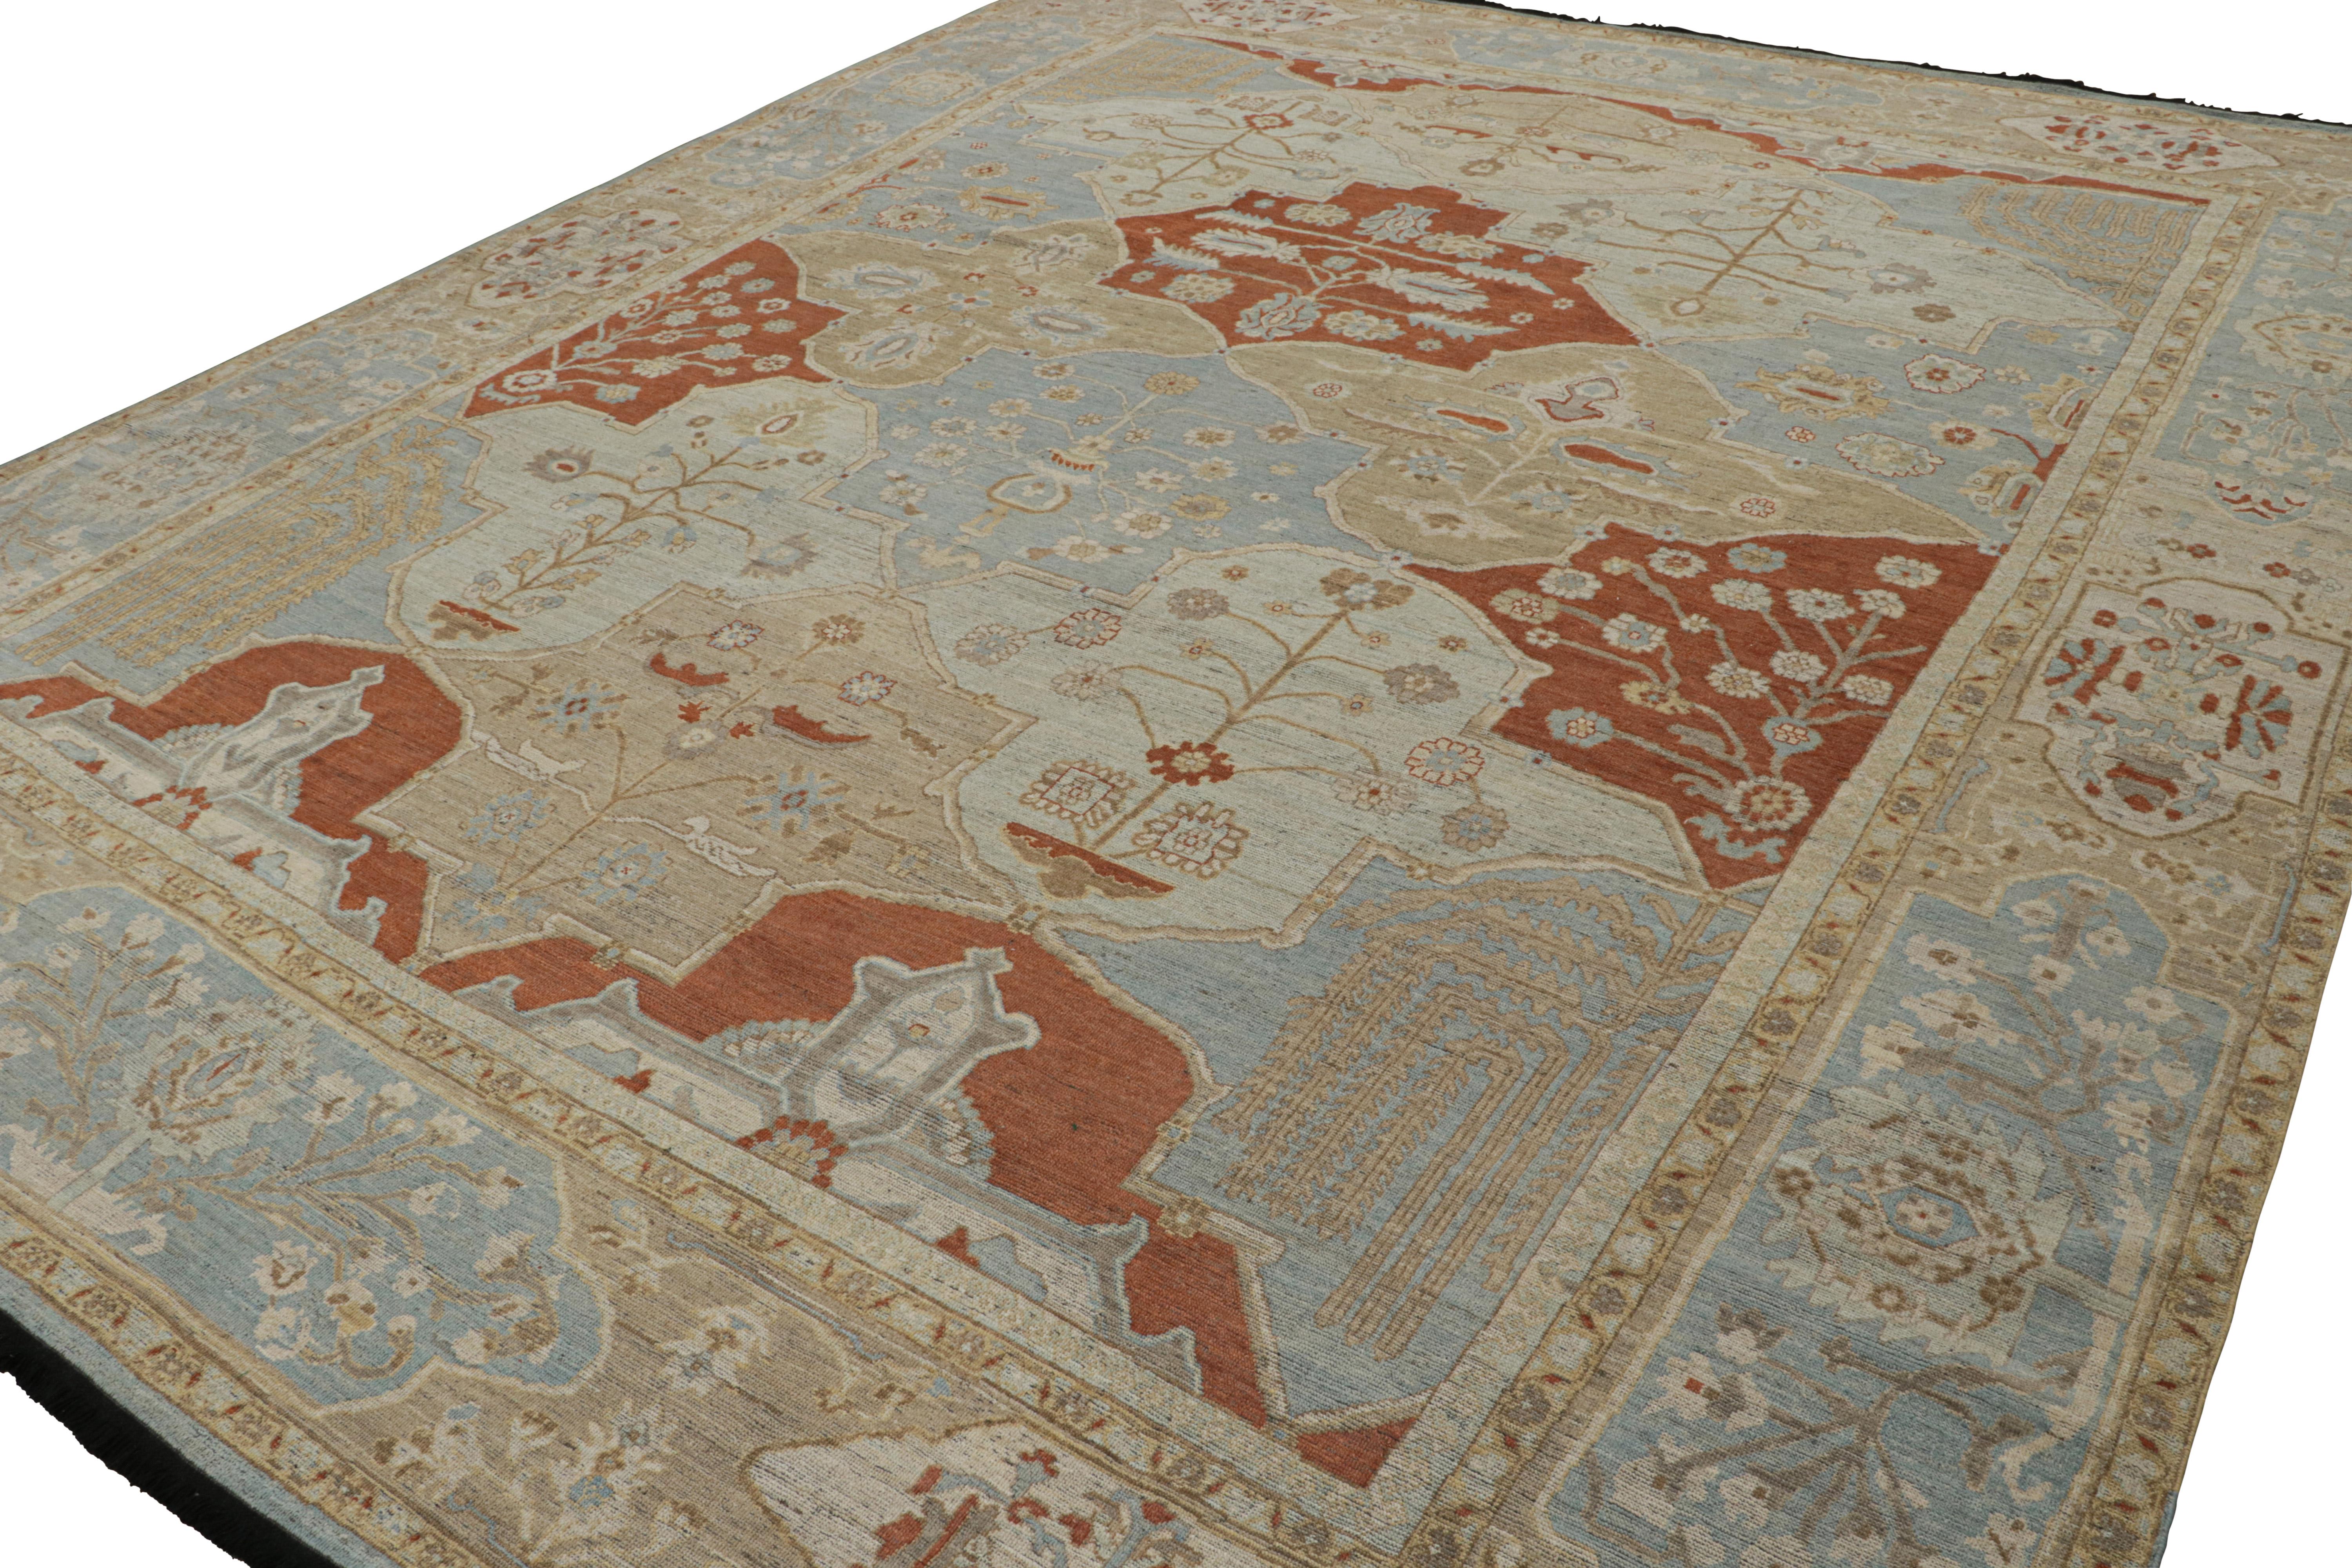 Hand knotted in wool, this 13x16 Burano rug in beige, red and blue tones with floral patterns and cartouches almost like those of Yazd rugs and similar rarities, is inspired by antique Persian rugs. 

On the Design: 

Inspired by antique Persian